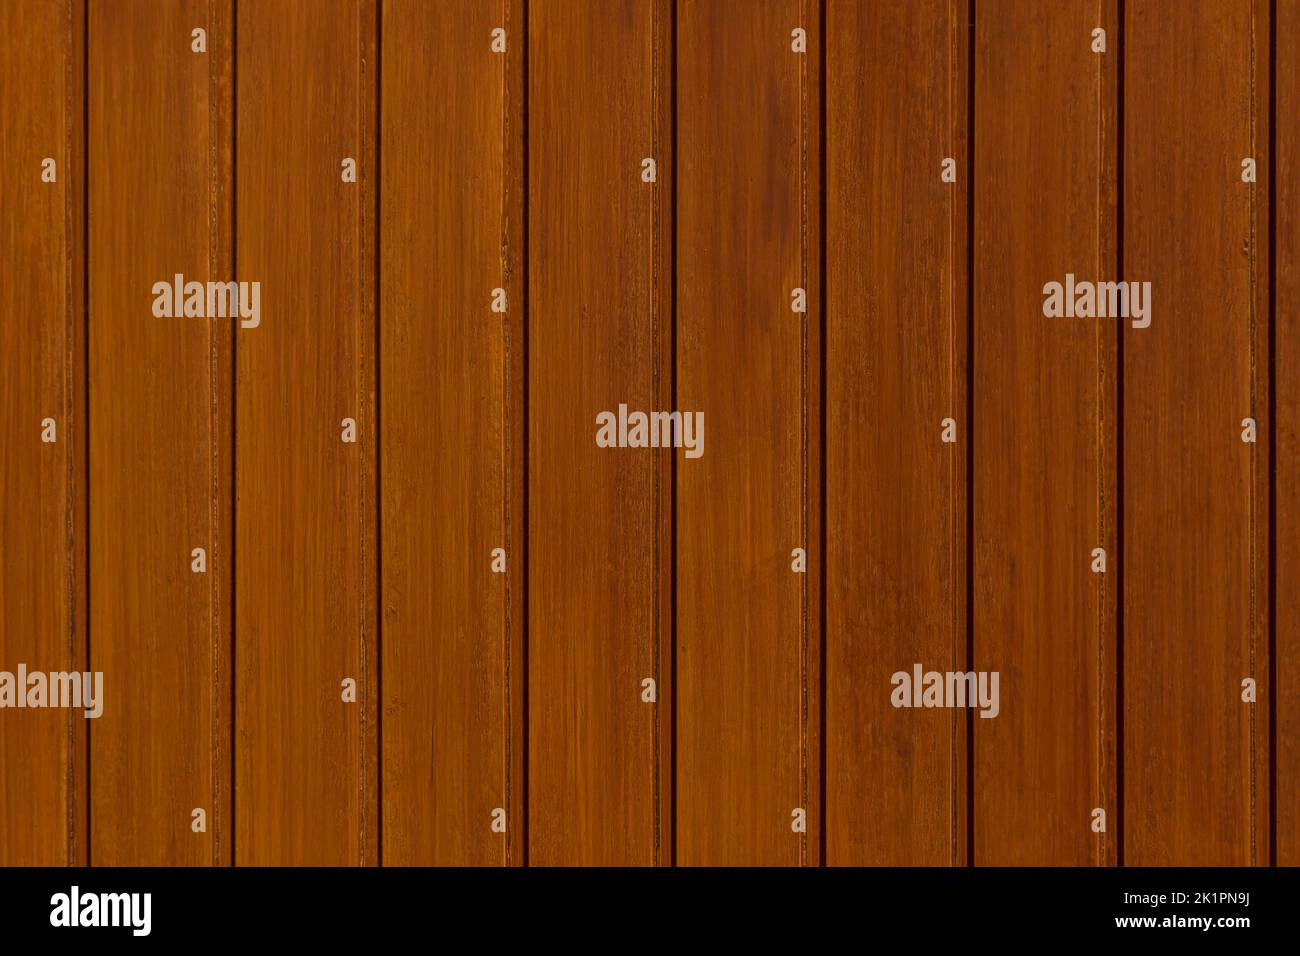 brown wooden wall made of vertical planks Stock Photo